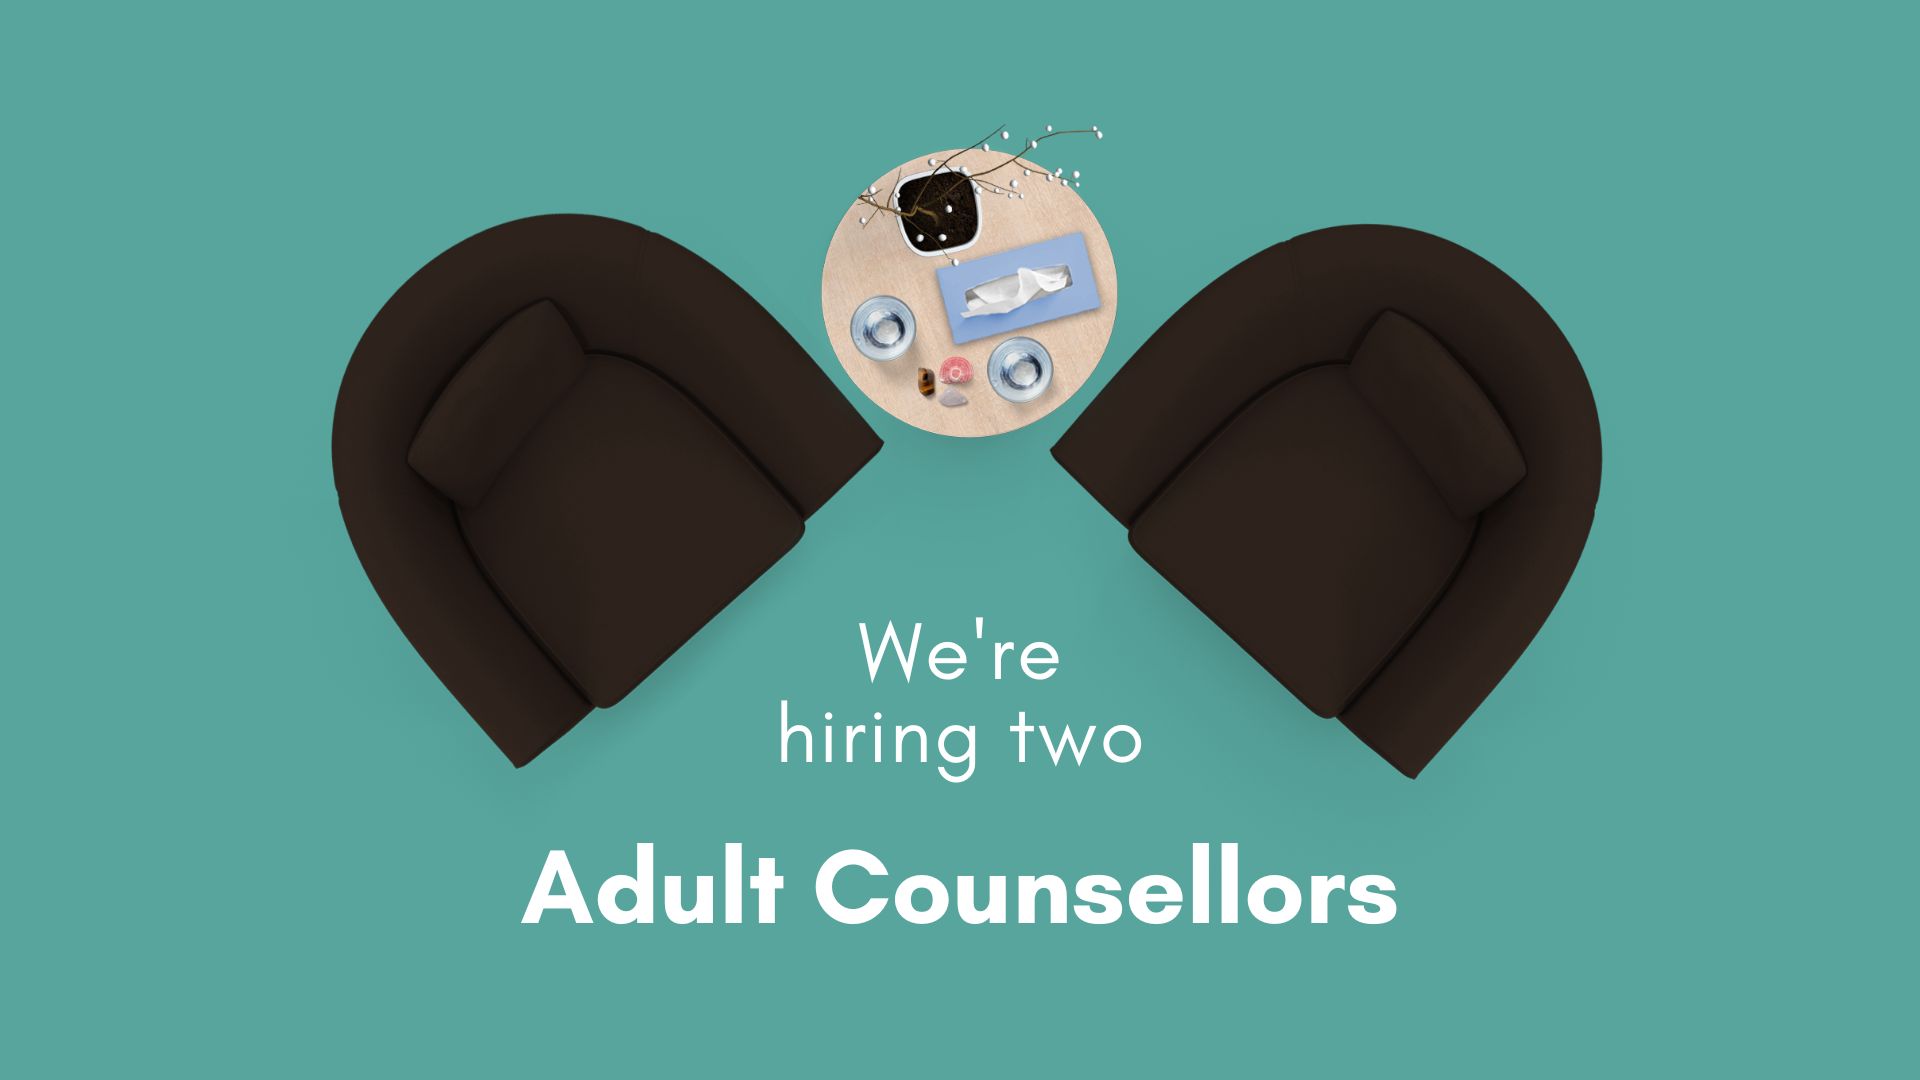 Two chairs facing each other on a teal green background, with text that says "We're hiring two Adult Counsellors"